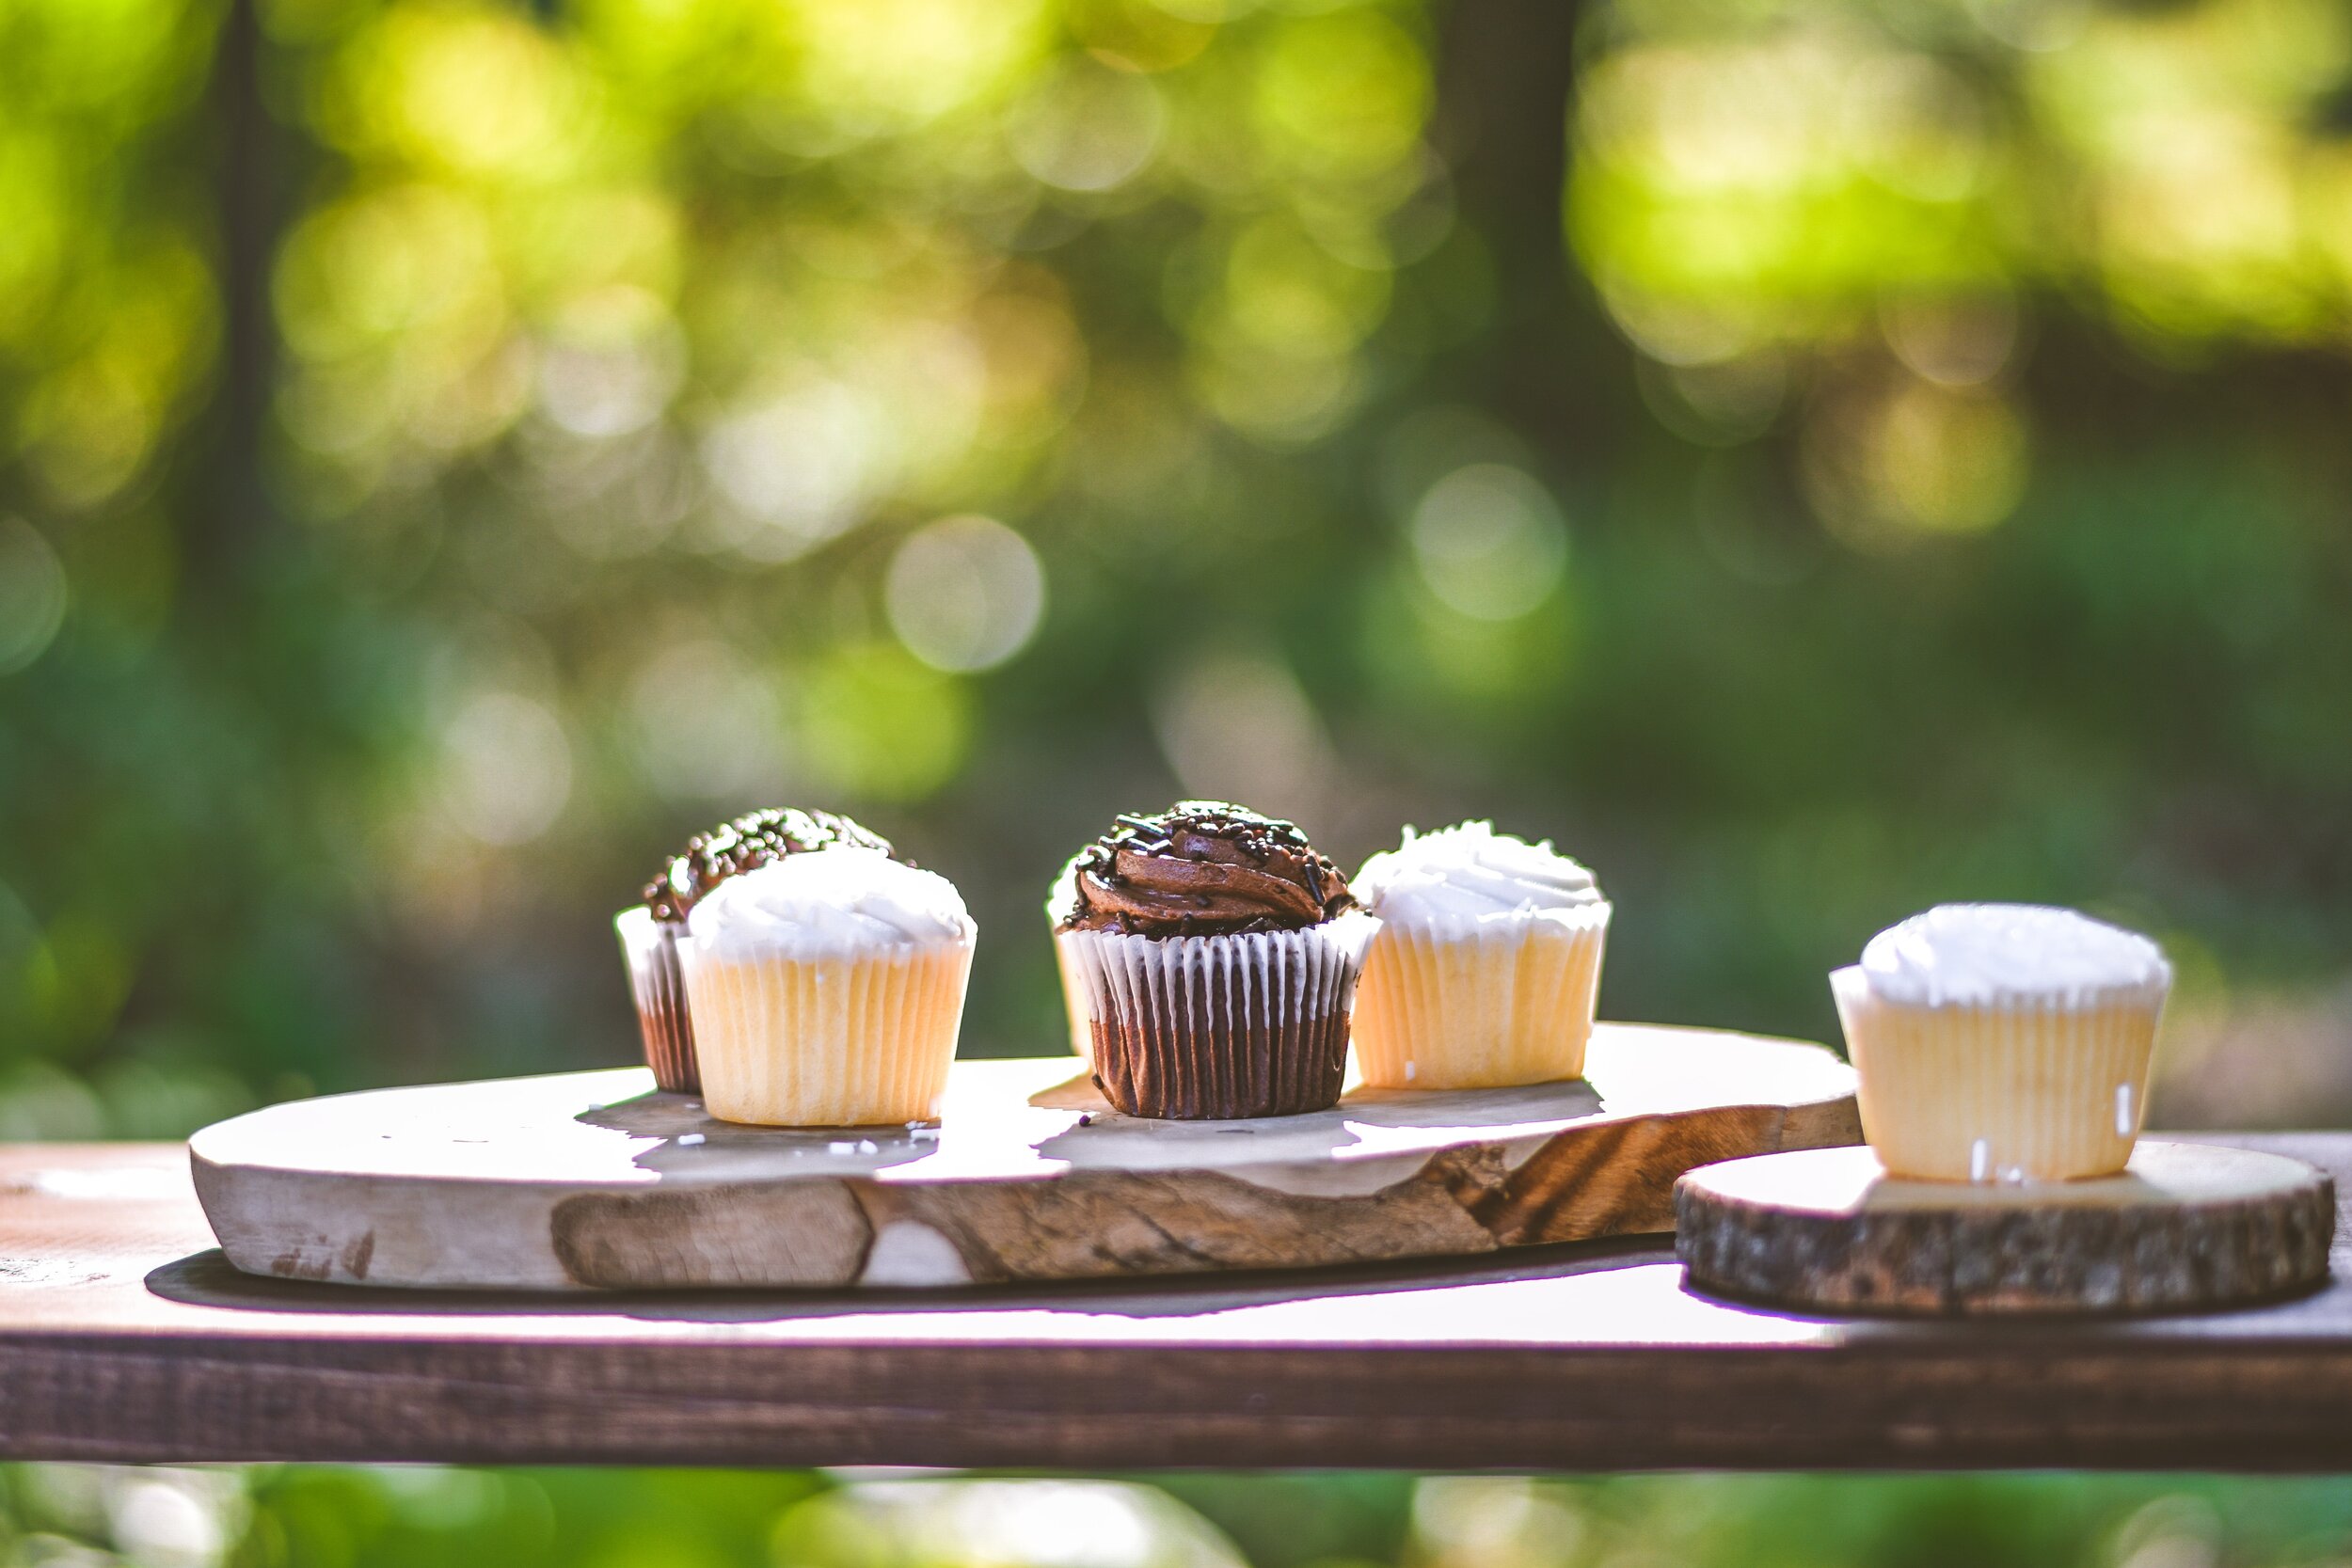 Cupcakes on a wood platter in the woods. Come celebrate your birthday at Cold Springs Resort in Camp Sherman, Oregon.